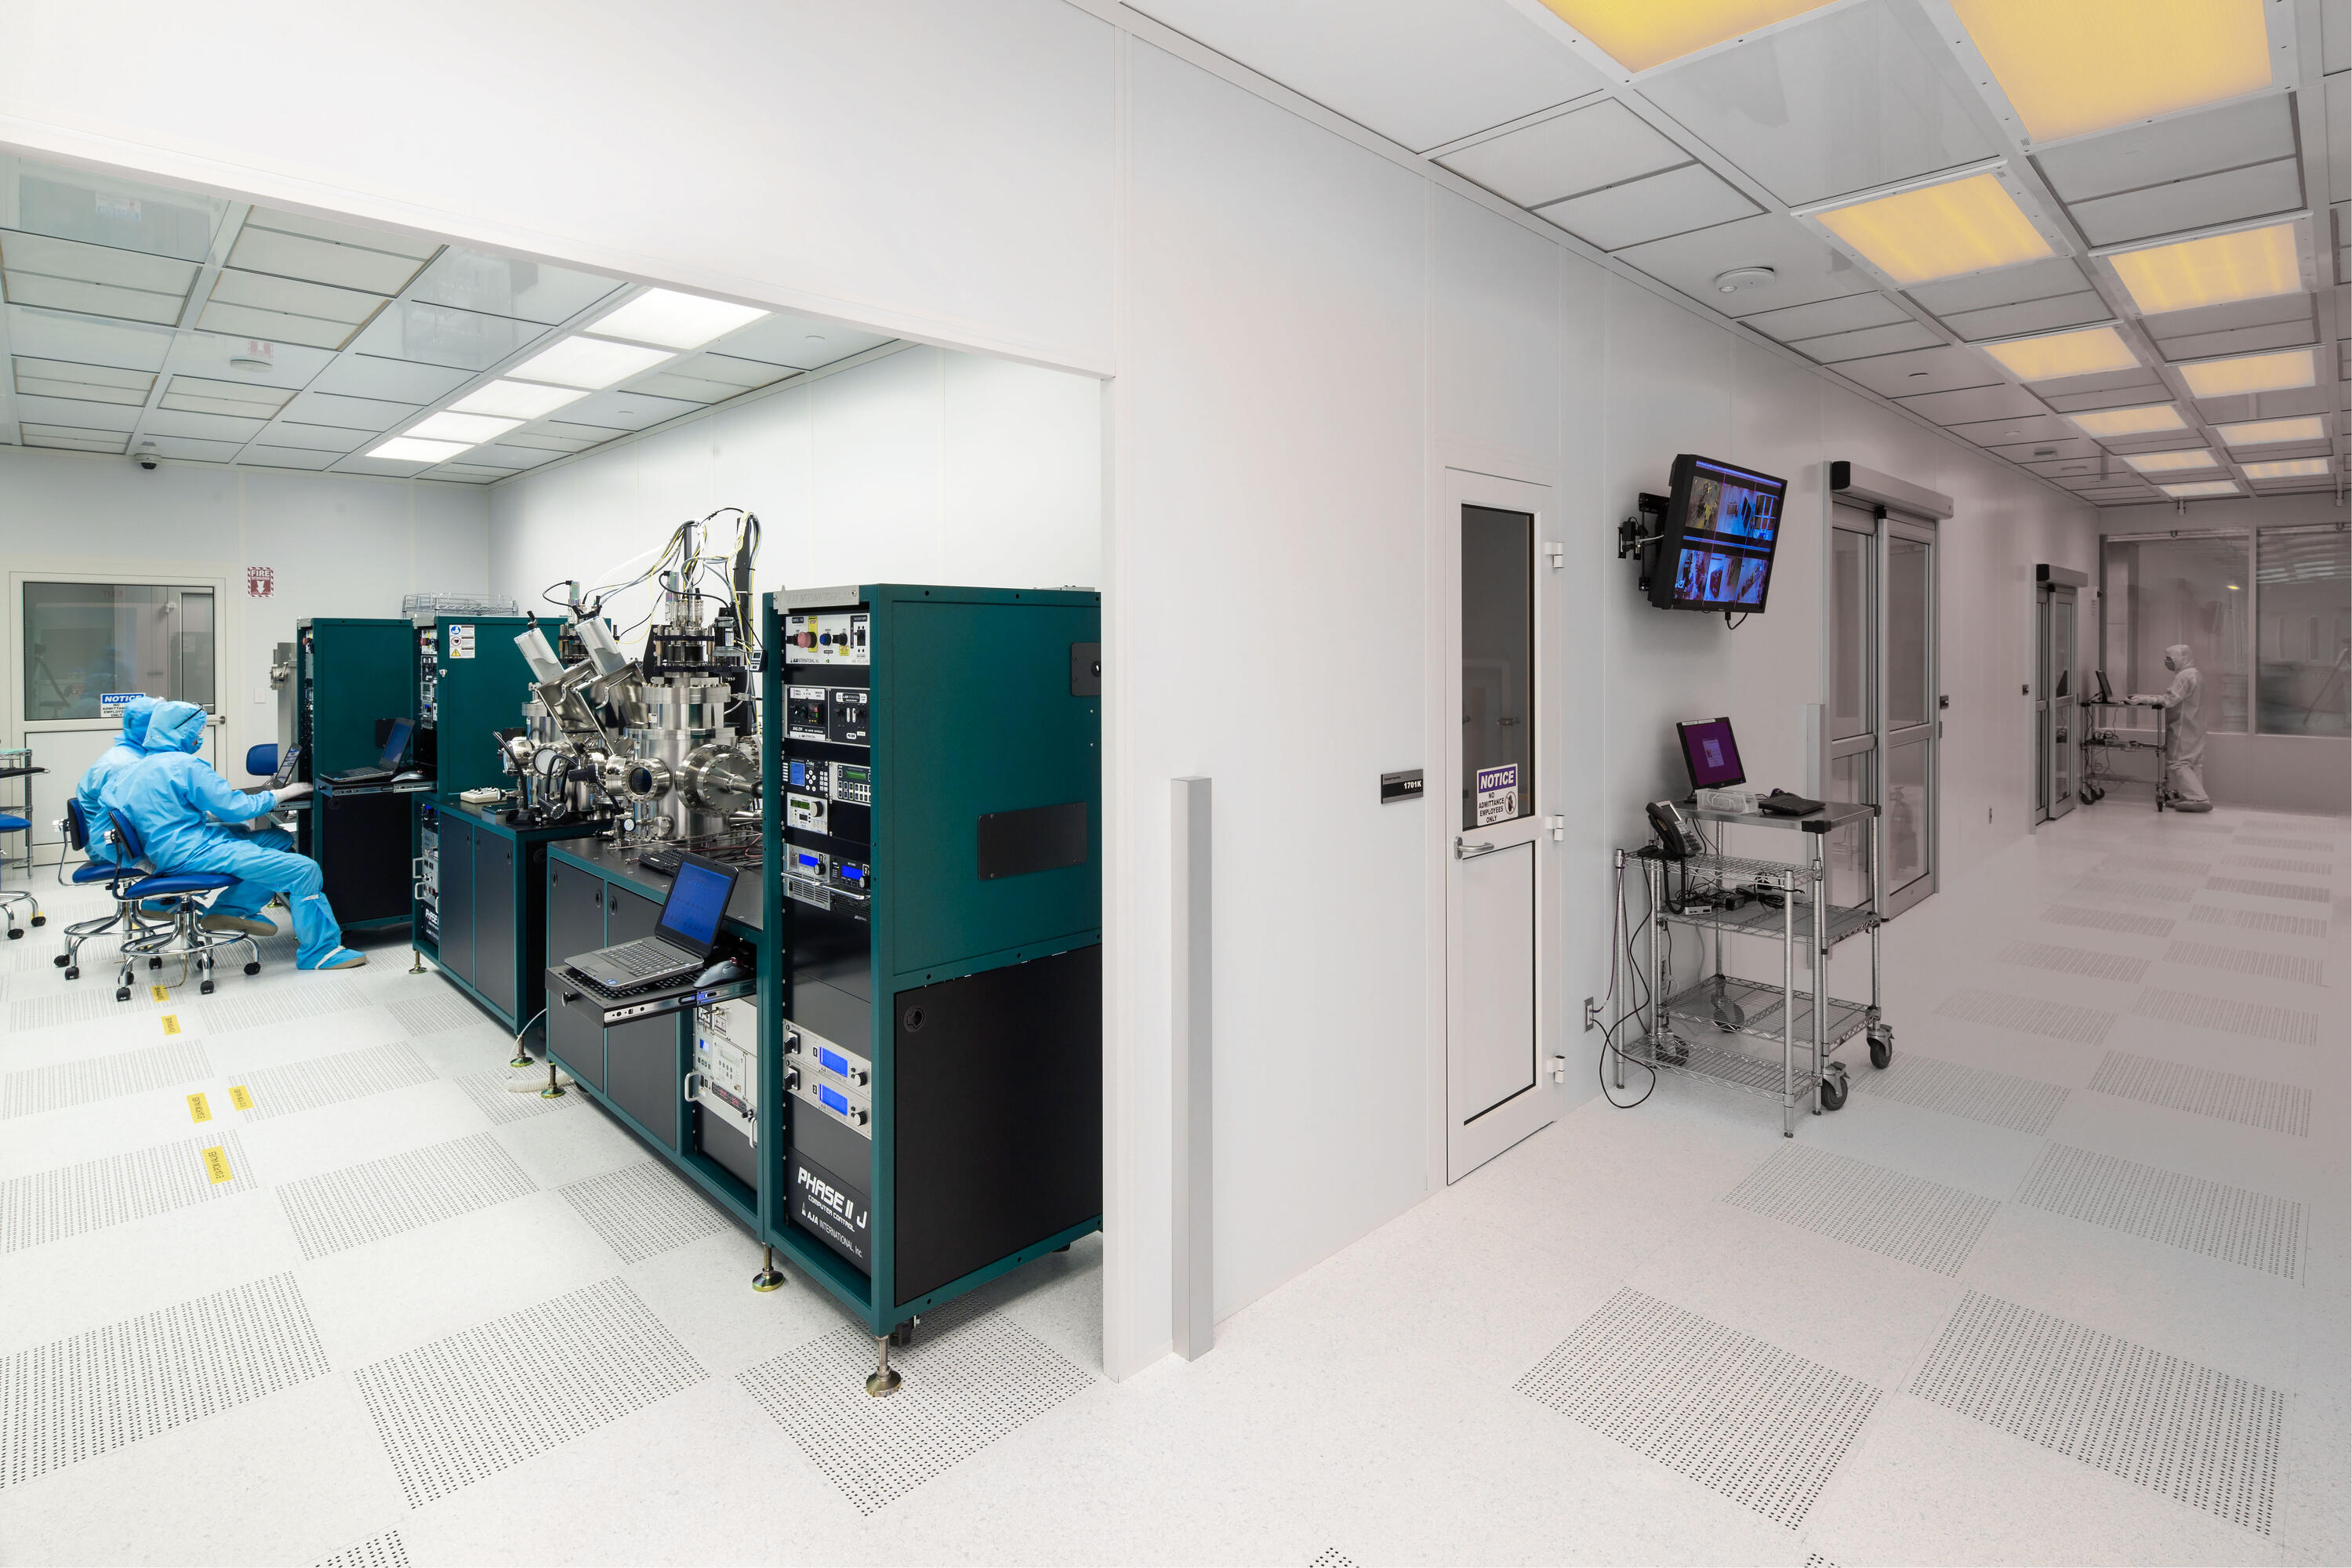 Inside the cleanroom at the Quantum-Nano Fabrication and Characterization facility